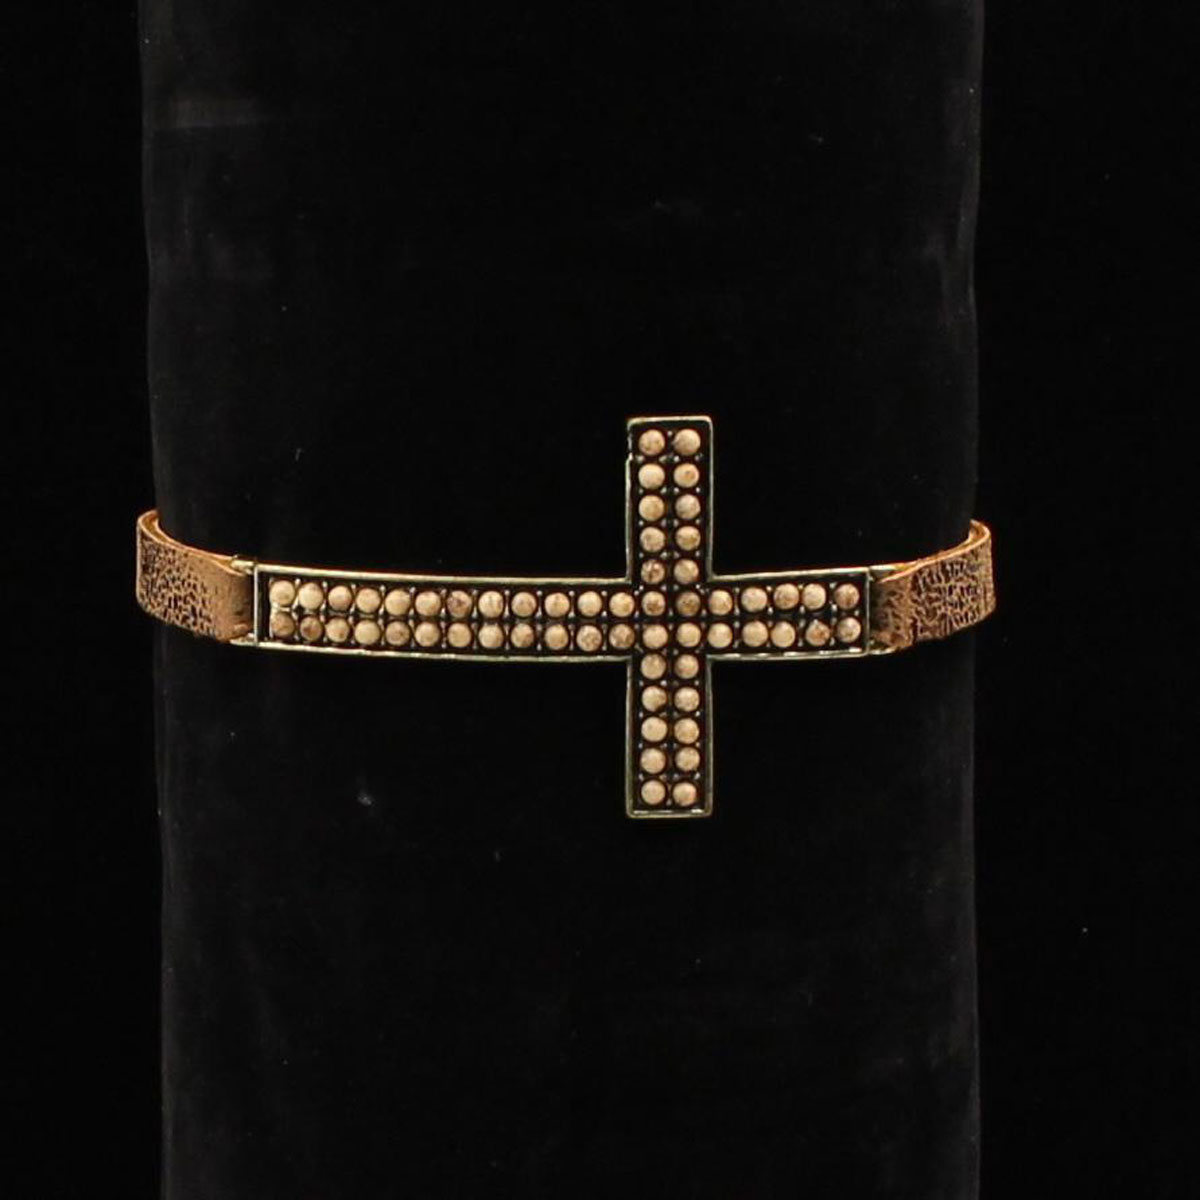 30942 Natural Stone Colored Cross With 2 Rows Of Beads Bracelet, Brown & Gold Colored Strap